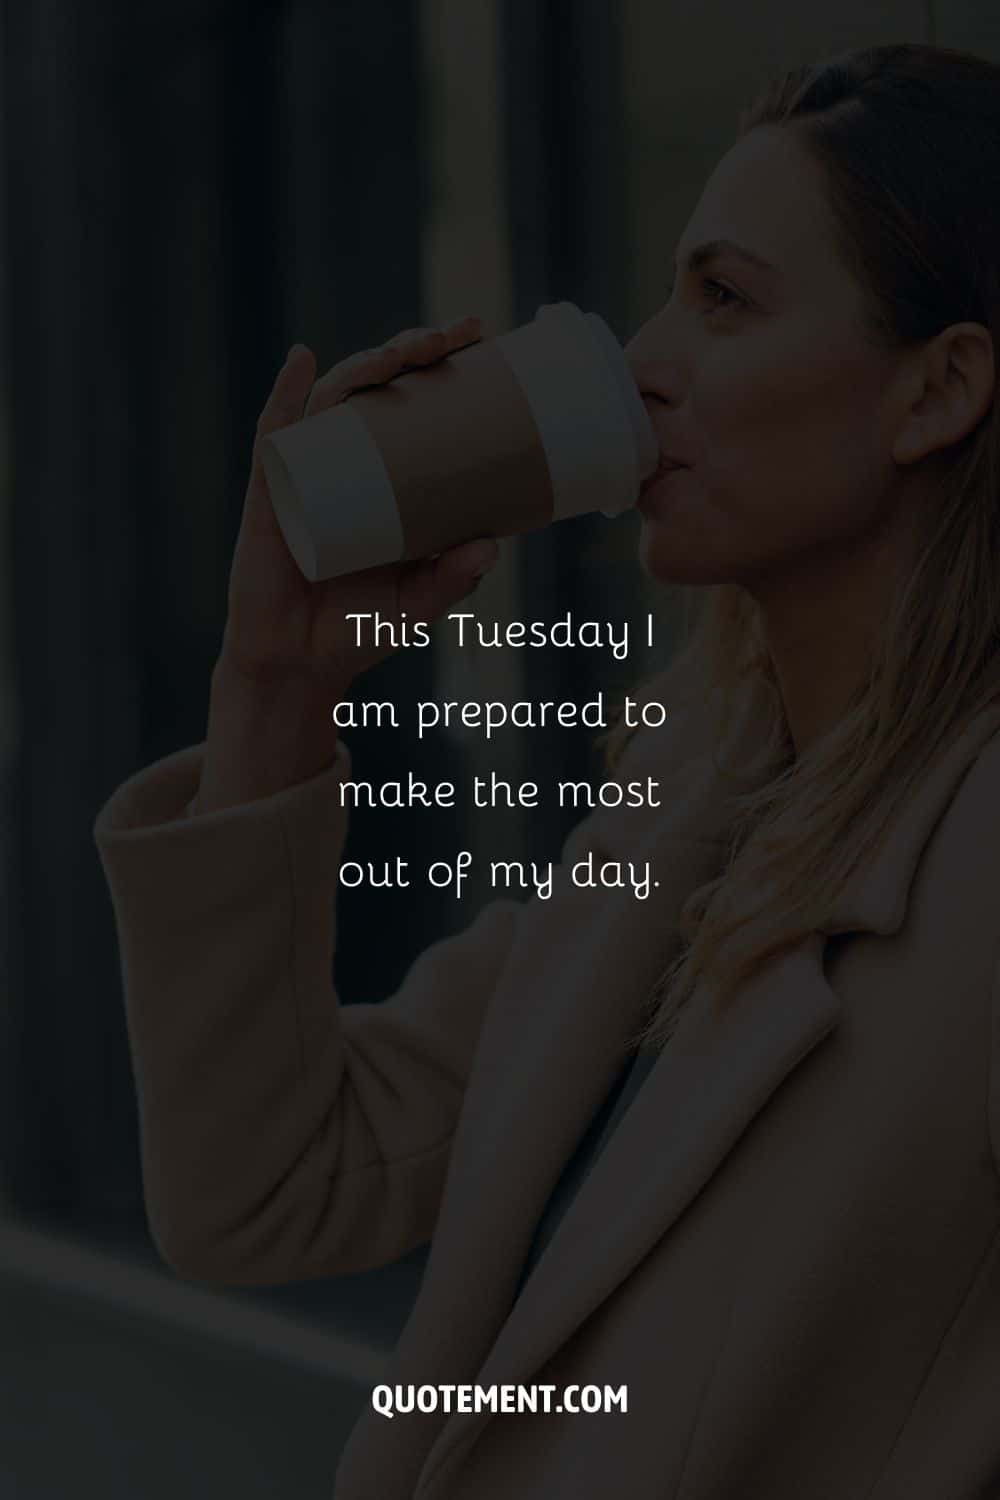 Image of a woman drinking coffee representing a Tuesday work affirmation.
